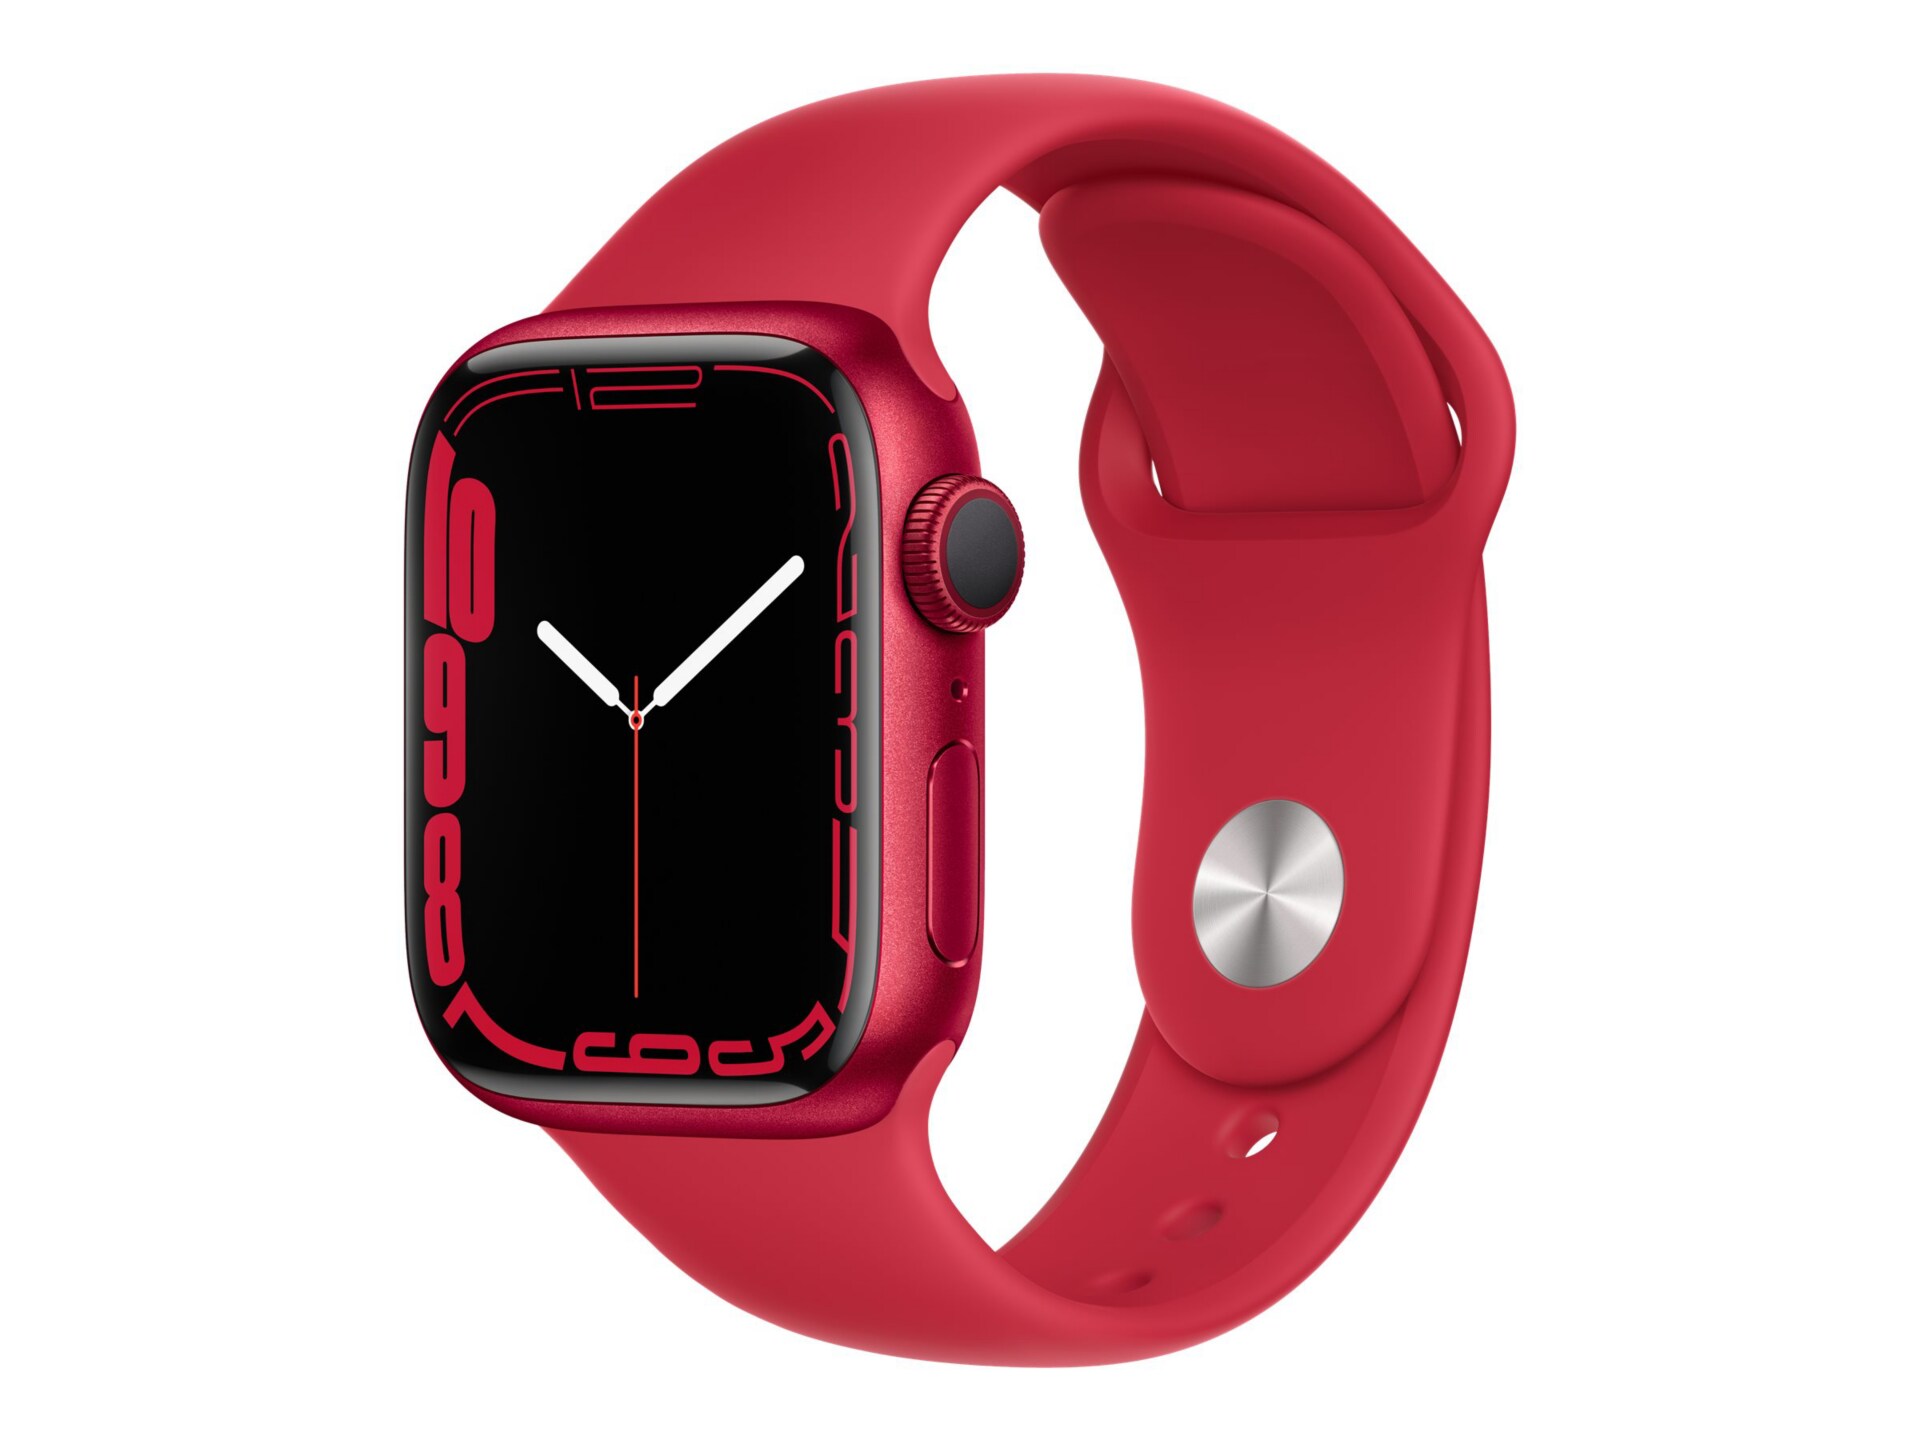 Apple Watch Series 7 (GPS) (PRODUCT) RED - red aluminum - smart watch with sport band - red - 32 GB